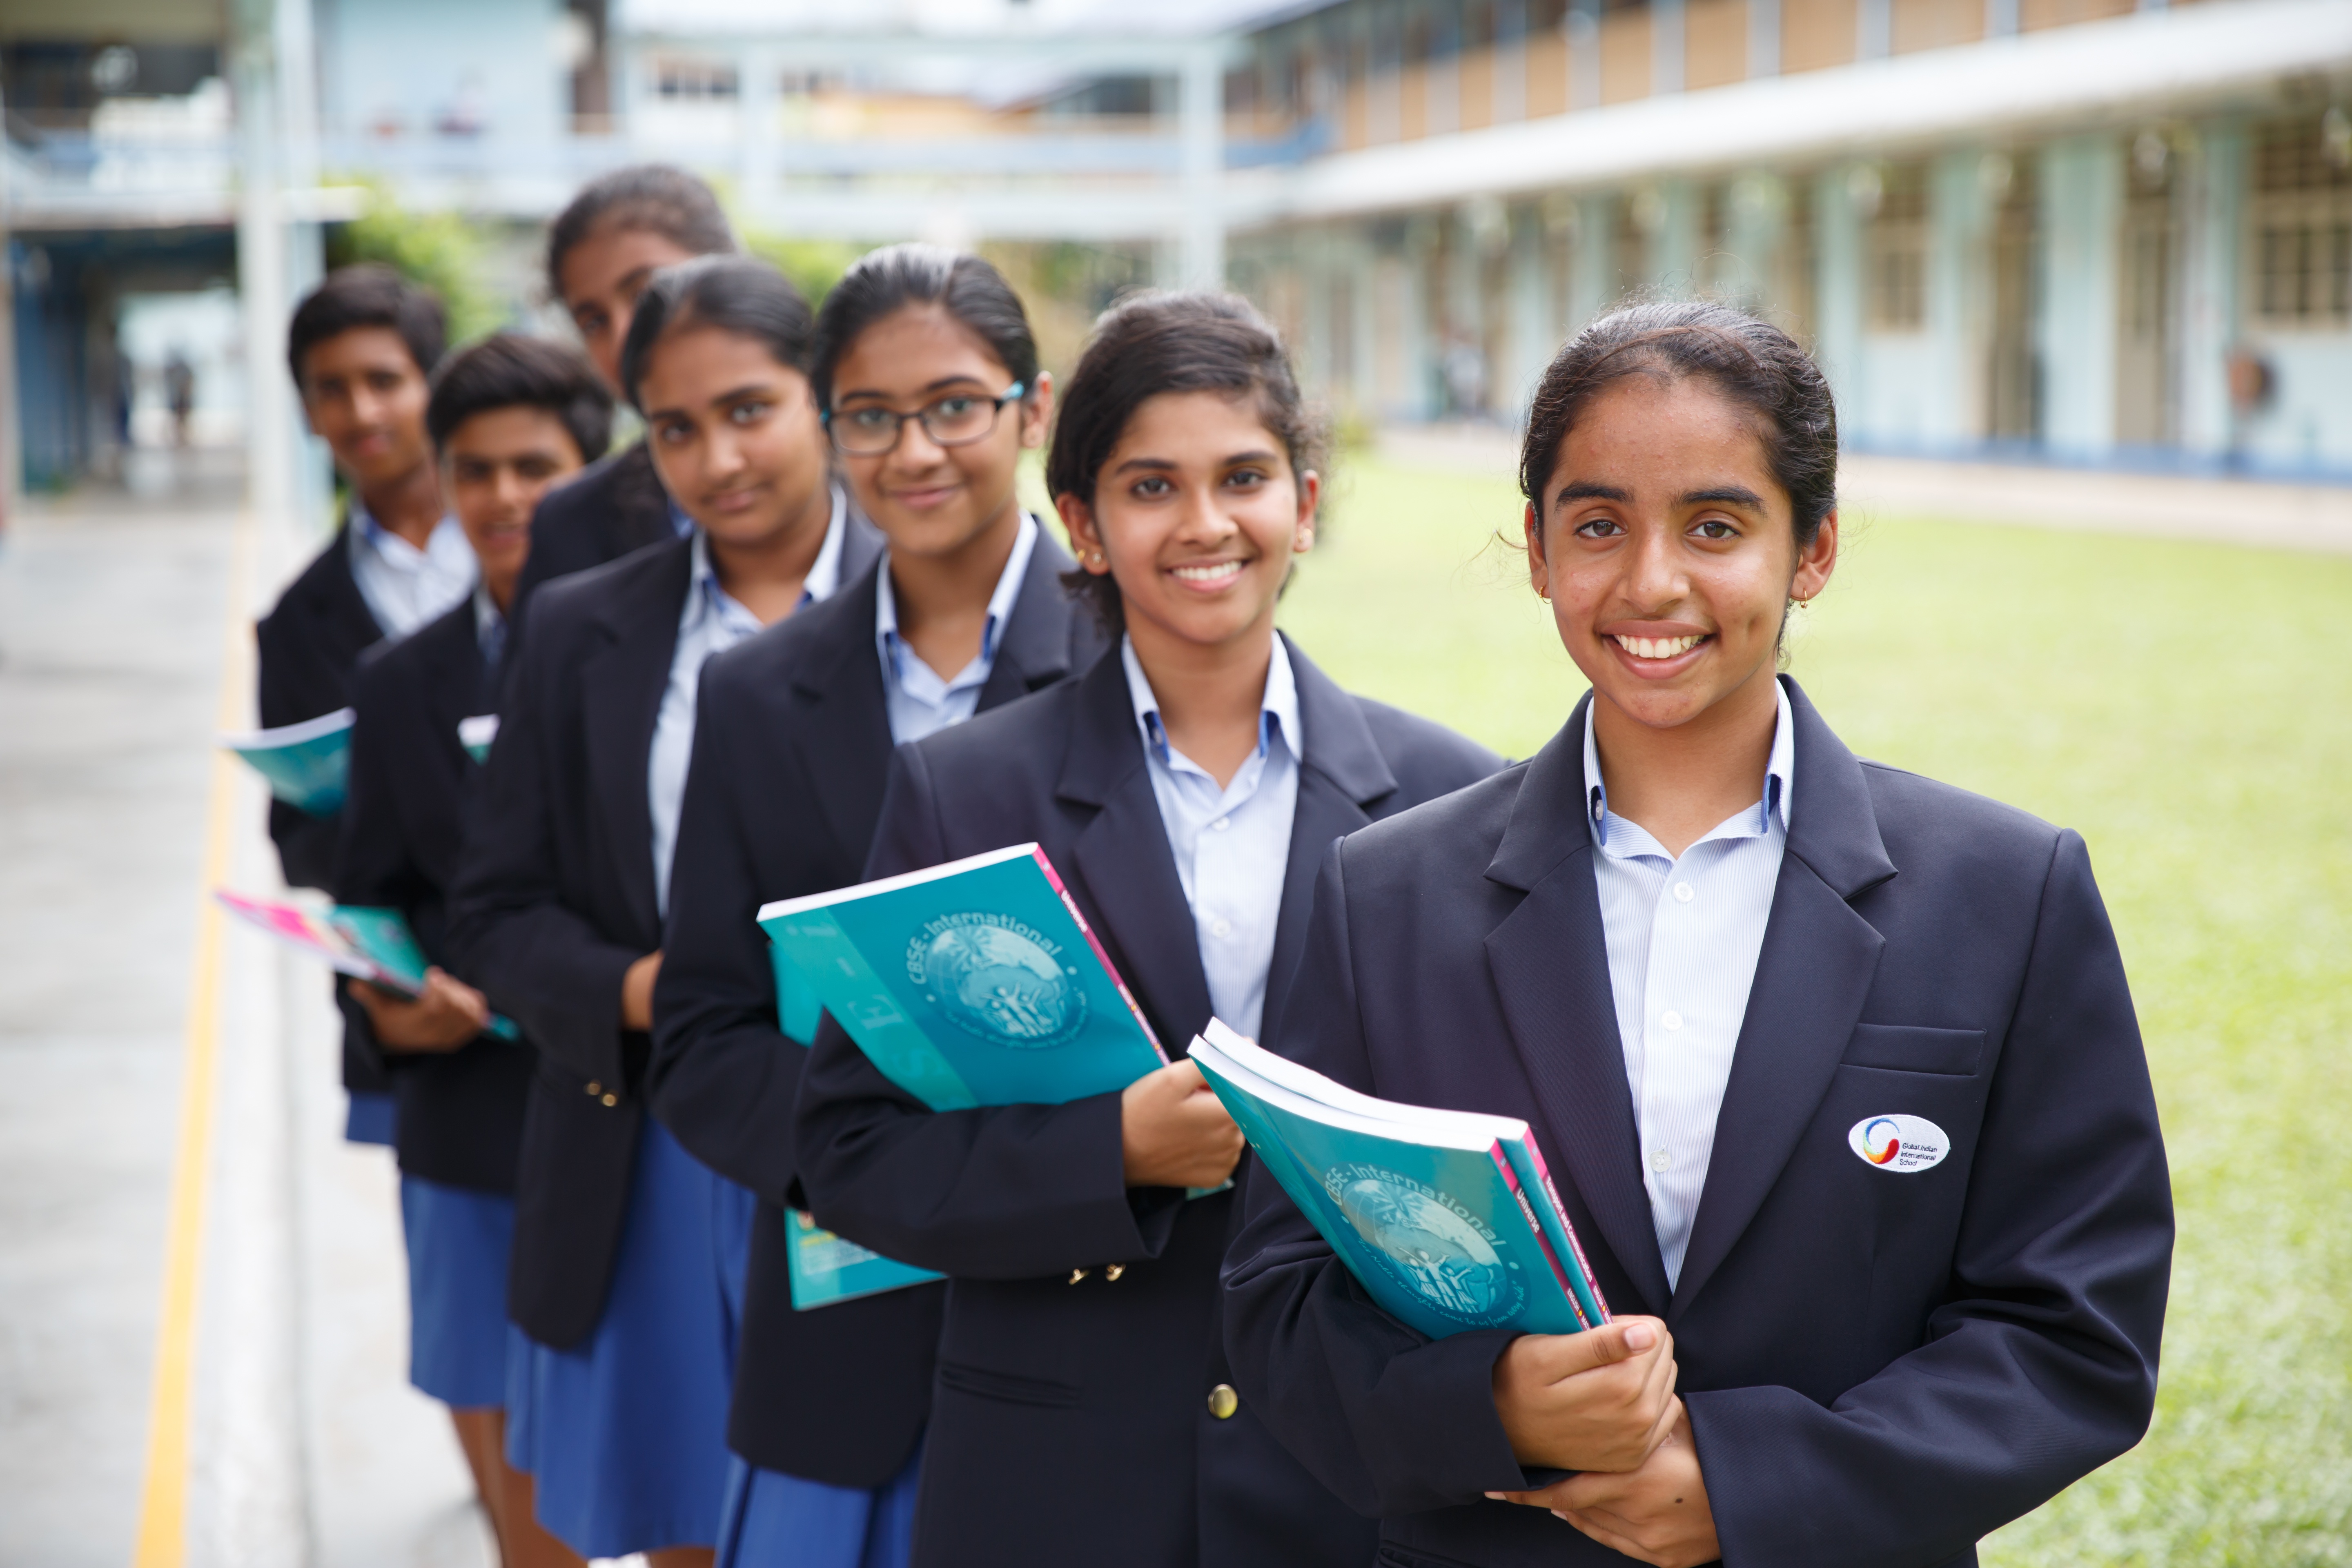 indian school student images